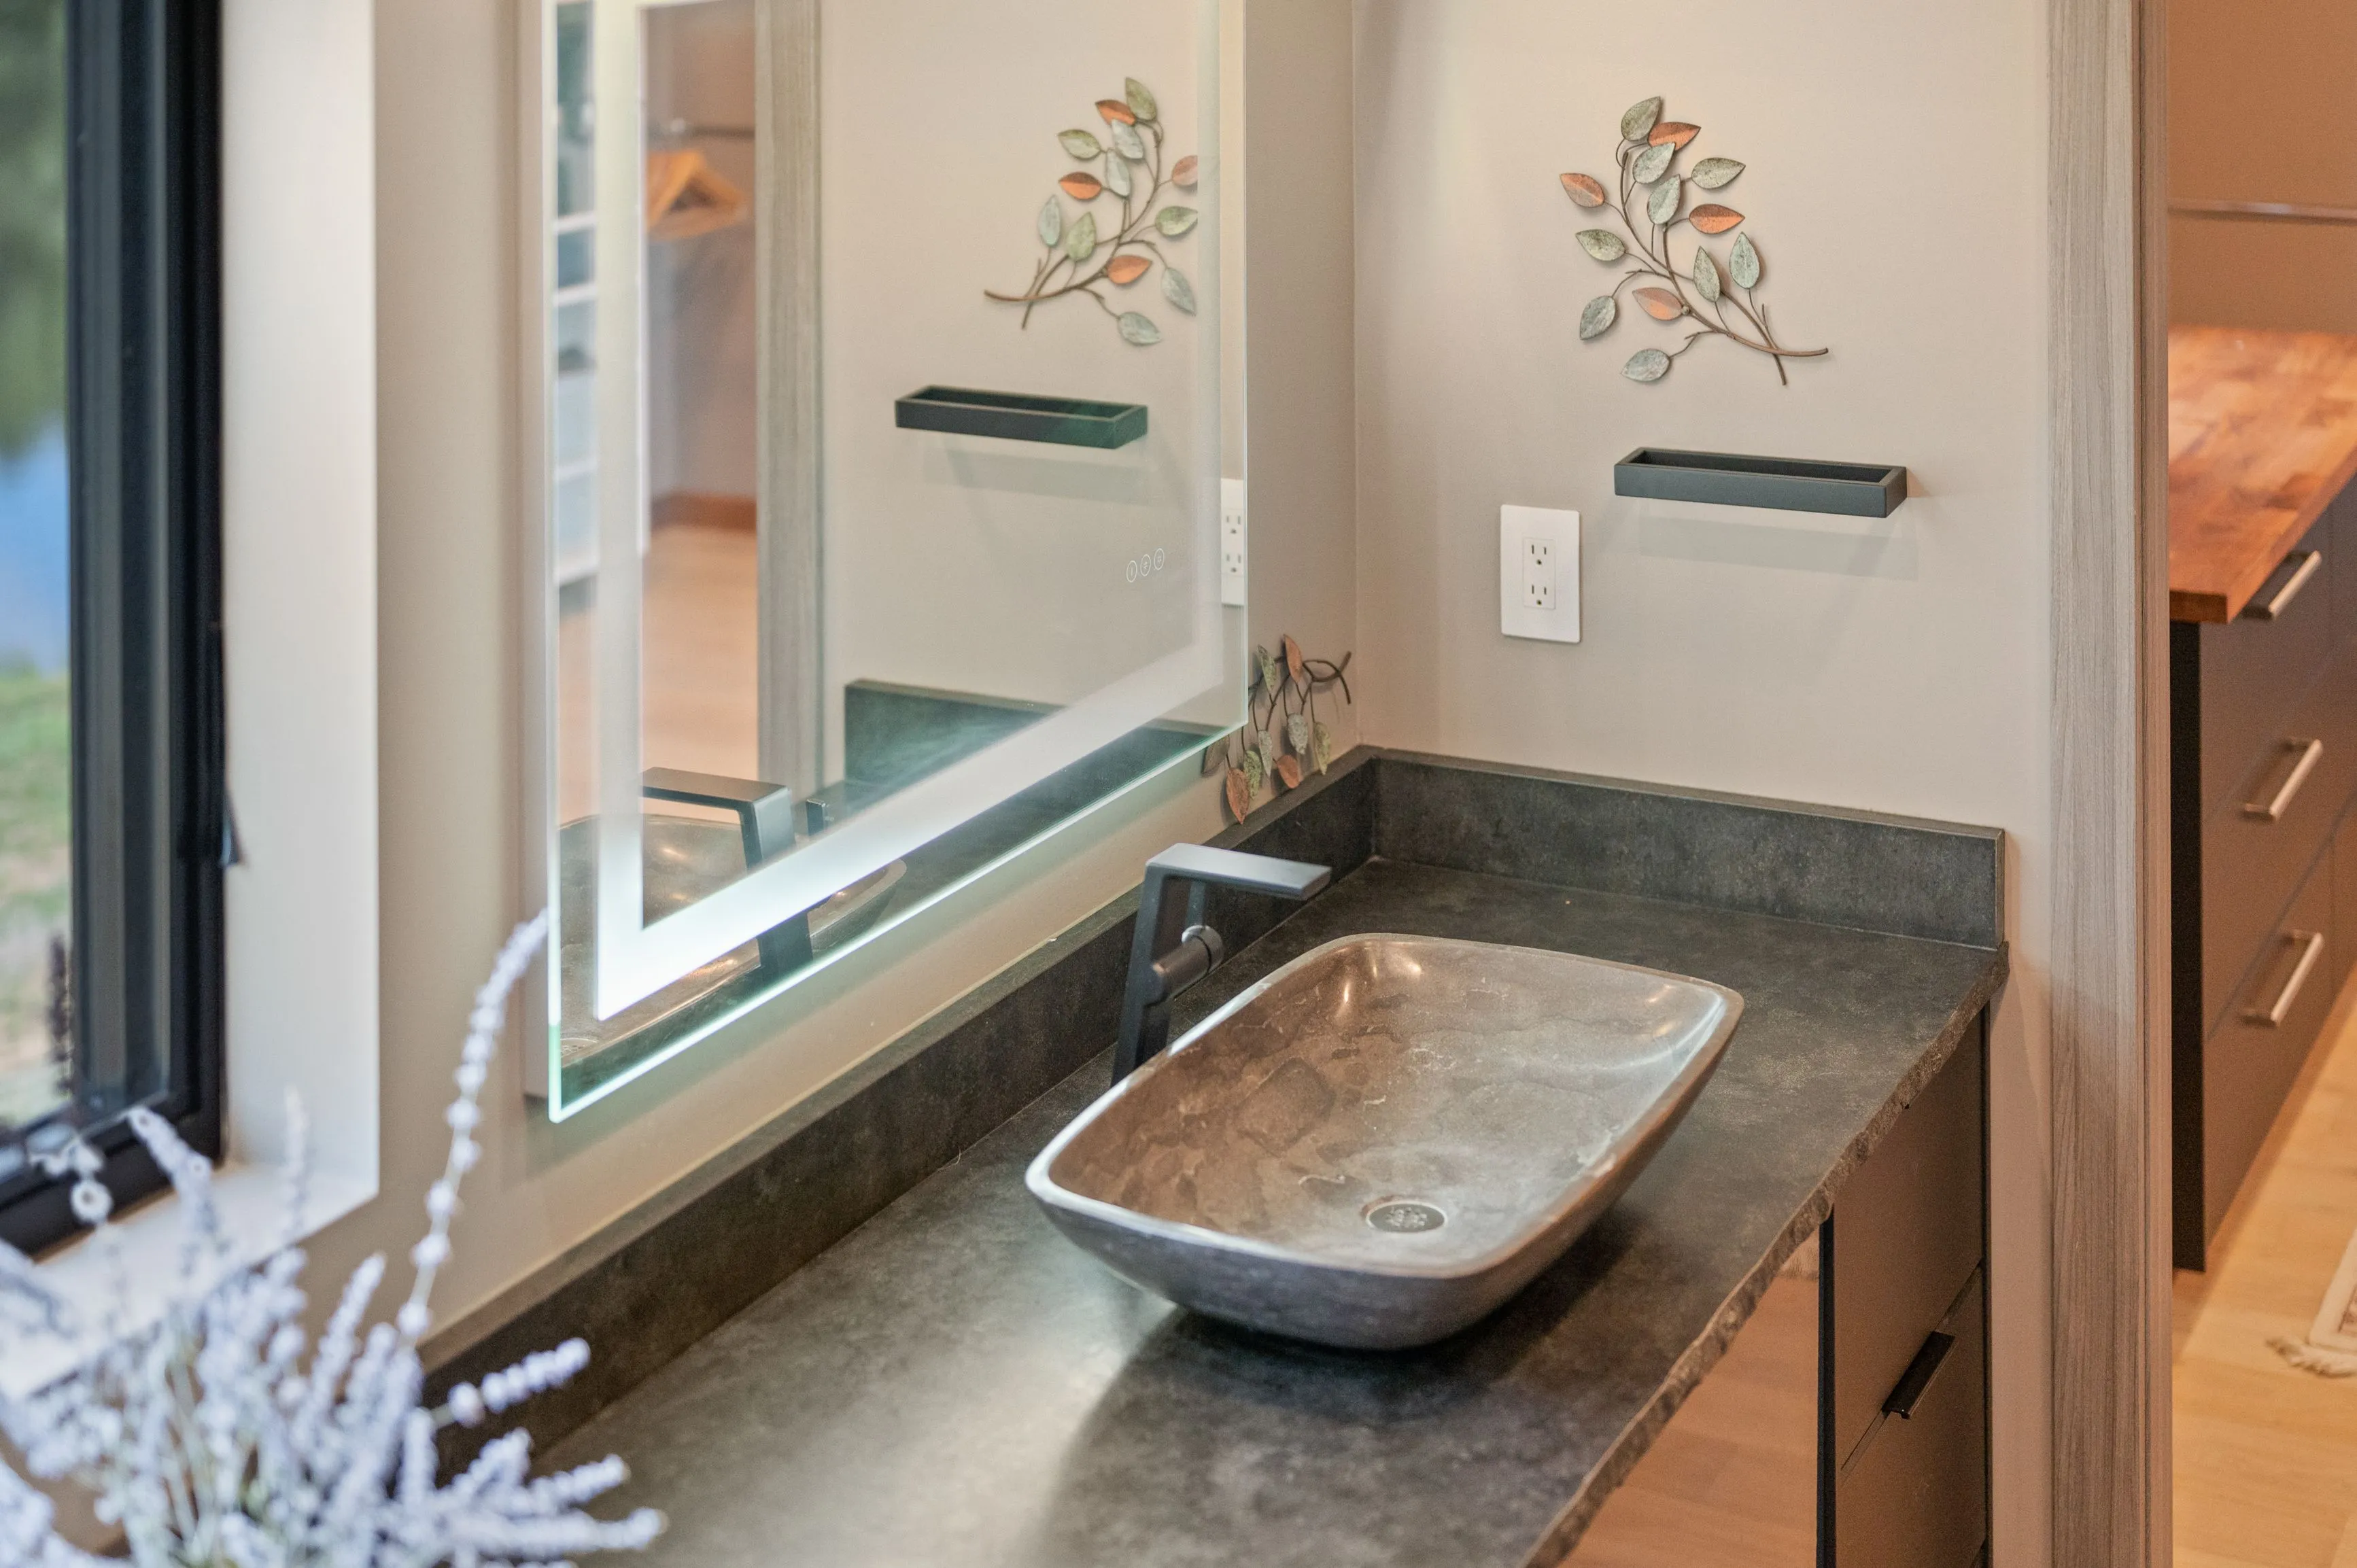 Modern bathroom with a stone countertop and vessel sink, decorative mirror, and wall-mounted shelf, situated beside a window with a view of trees.